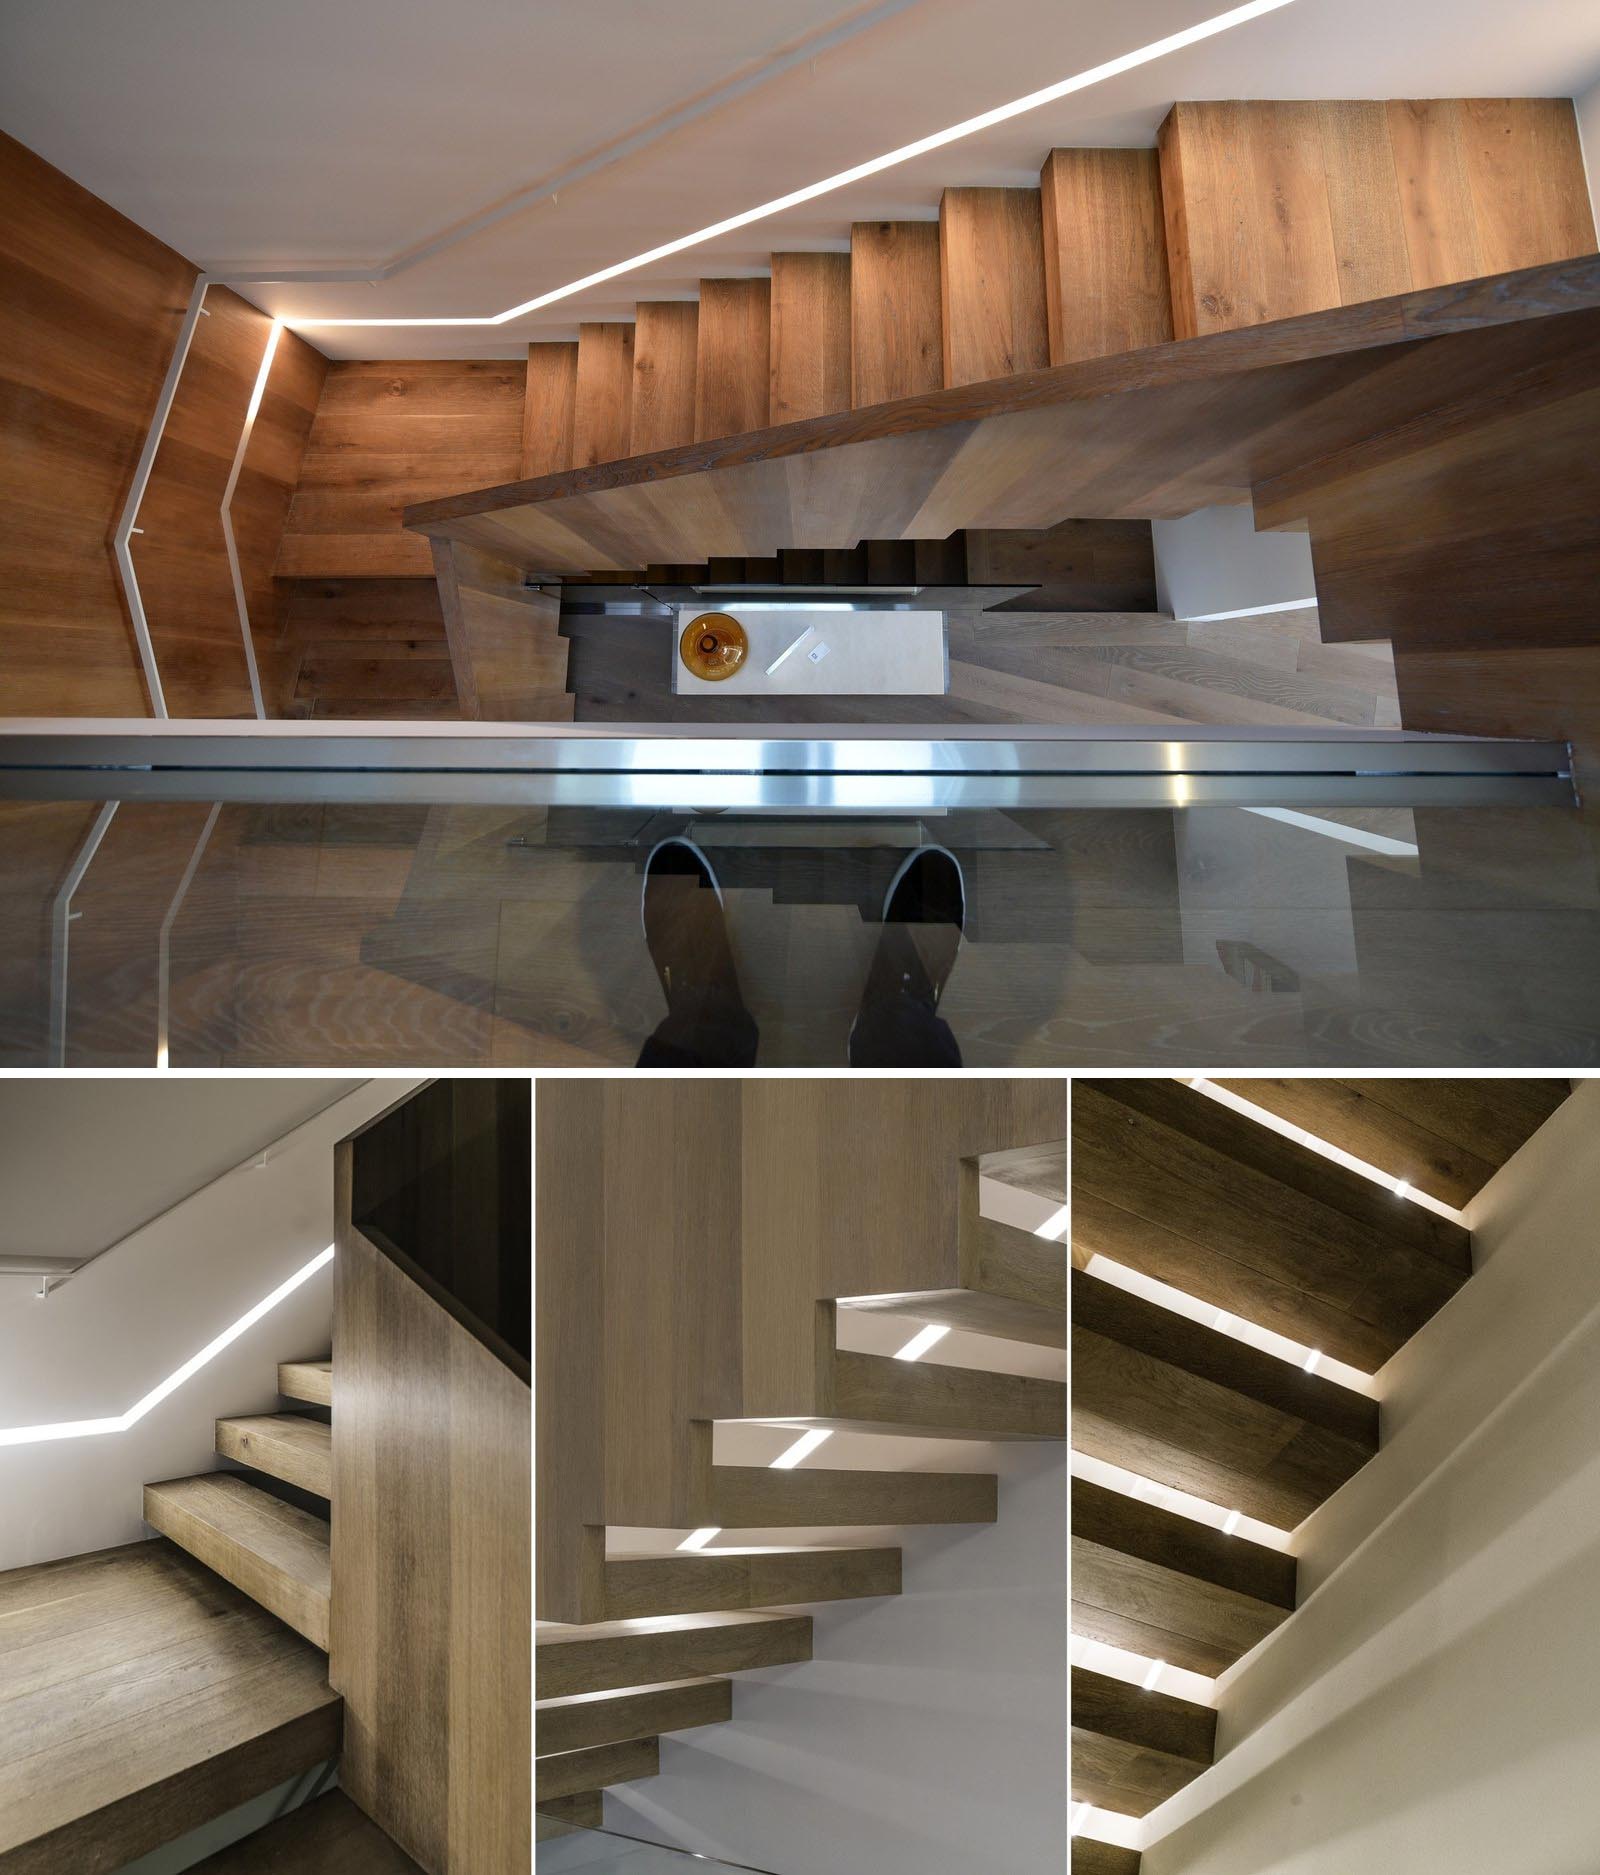 Modern wood stair lit by lighting built into the wall.